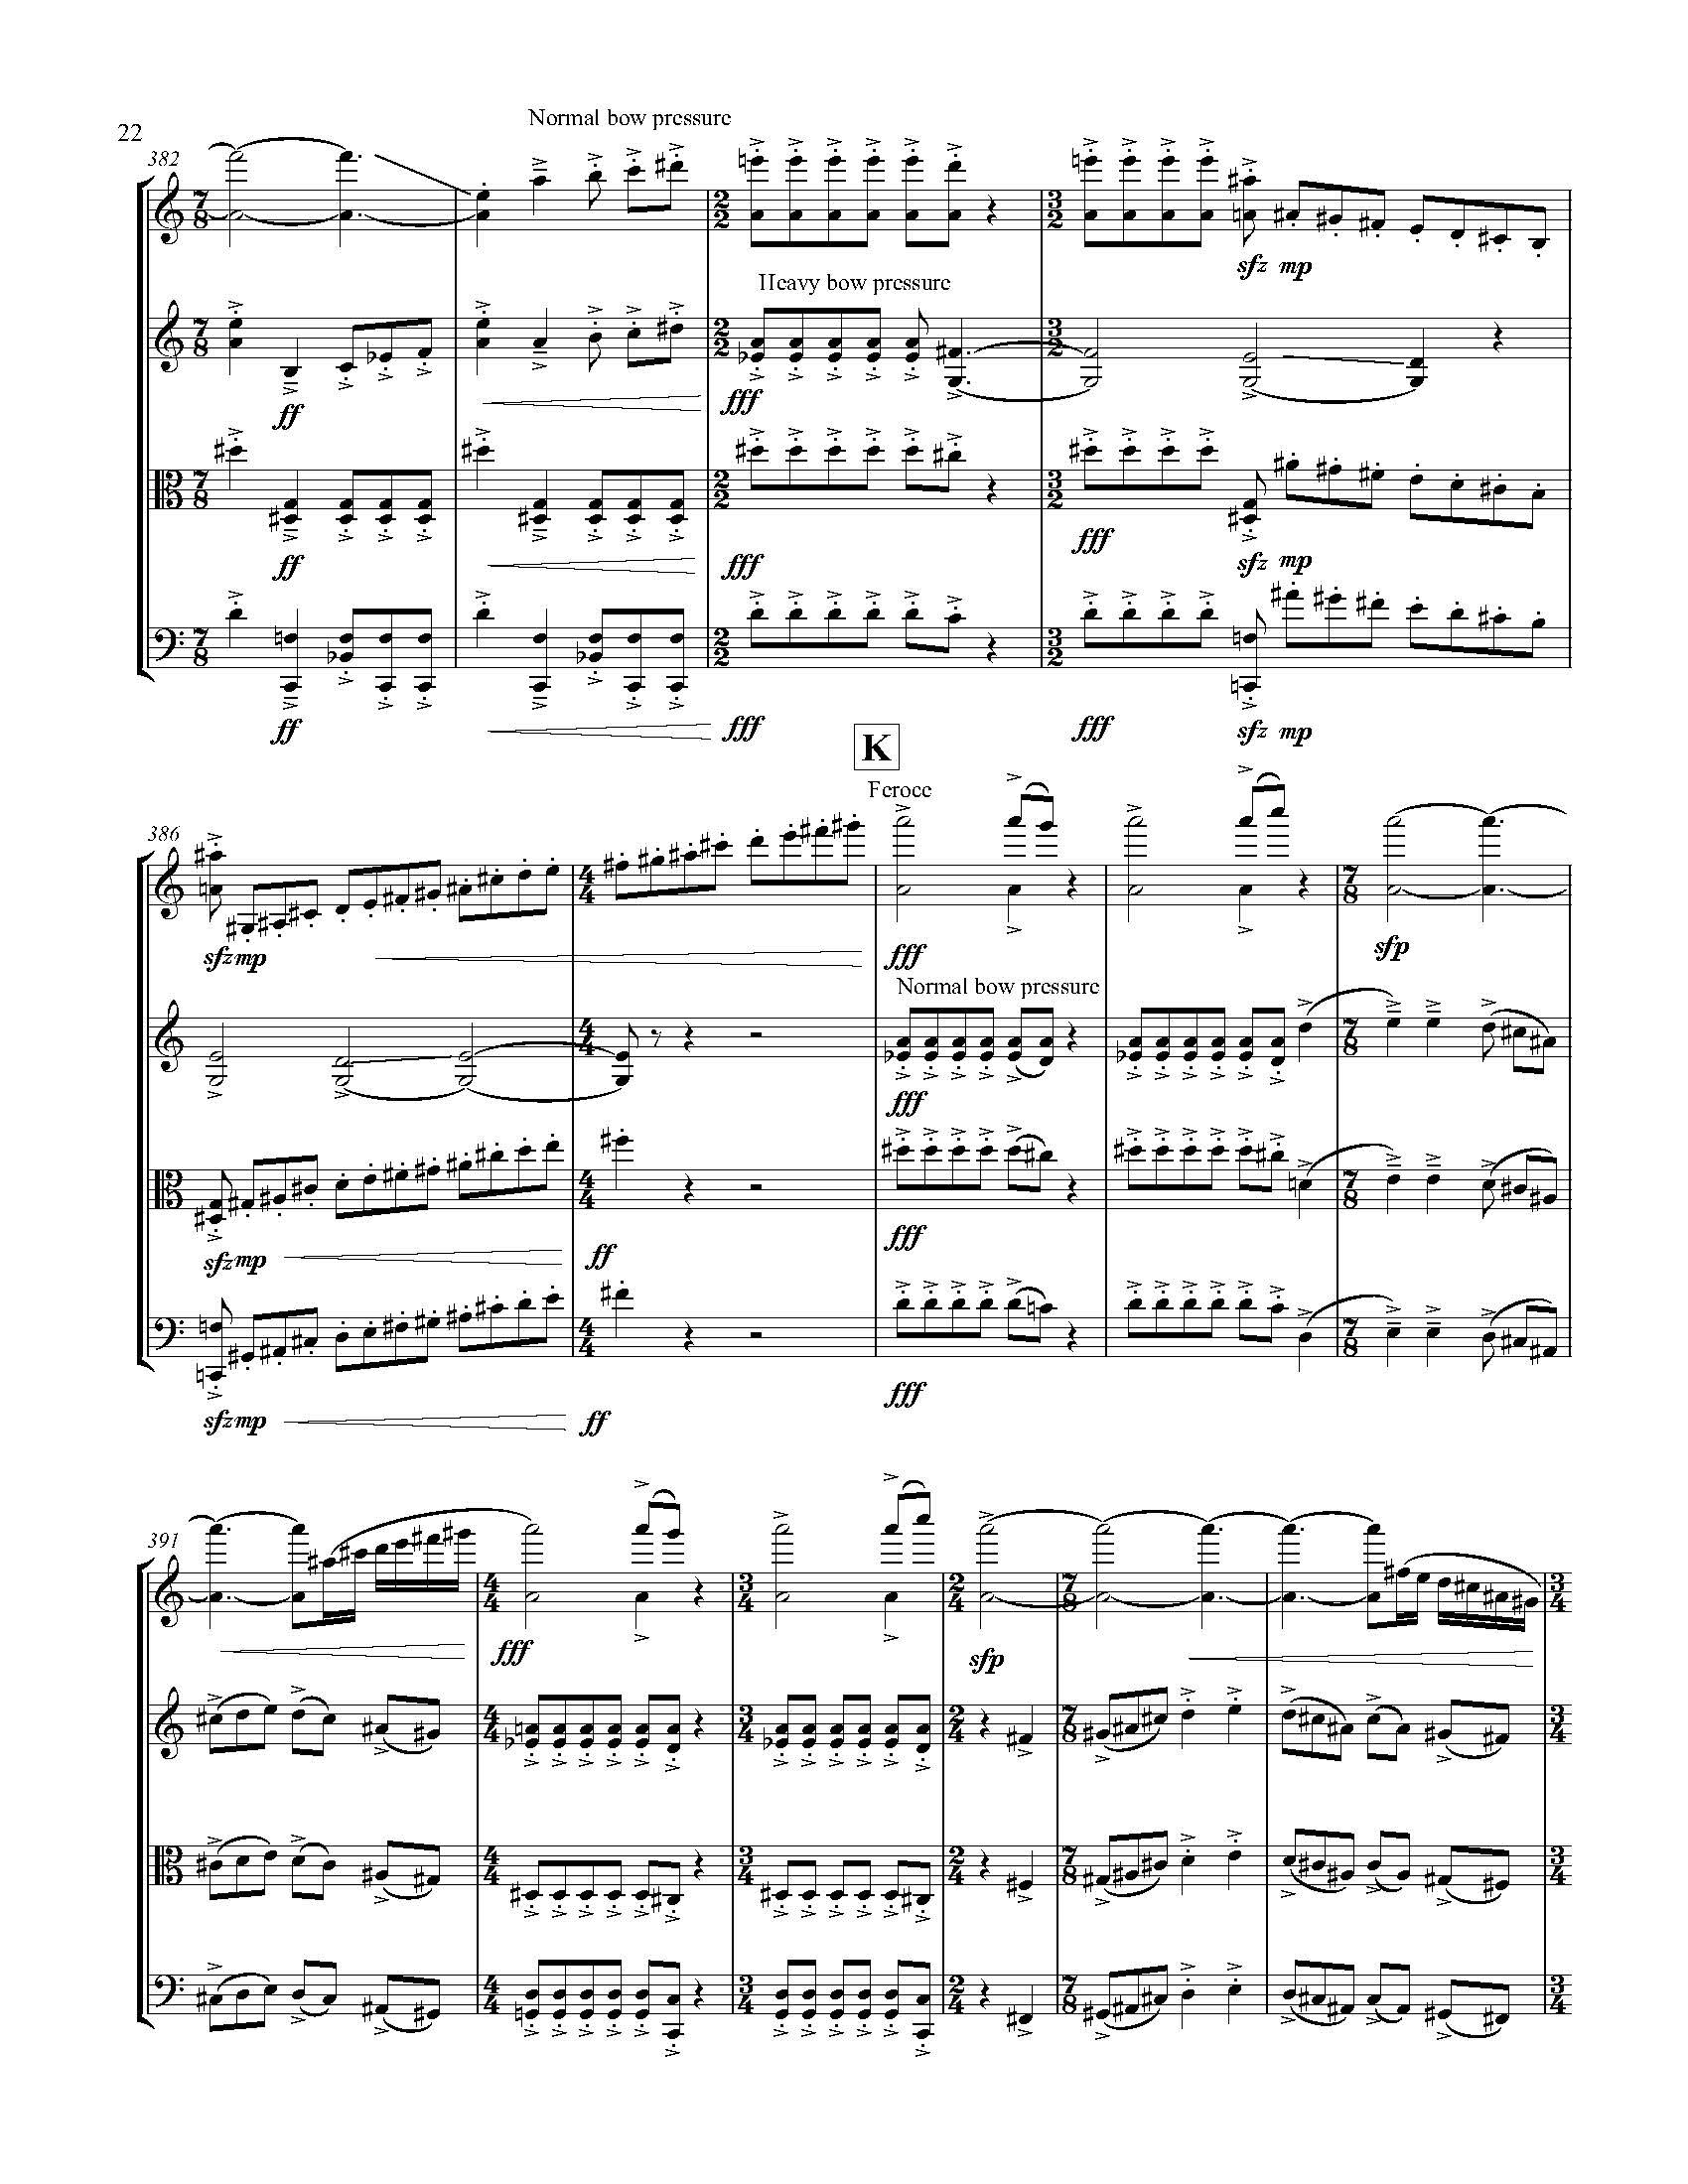 A Country of Vast Designs - Complete Score_Page_28.jpg